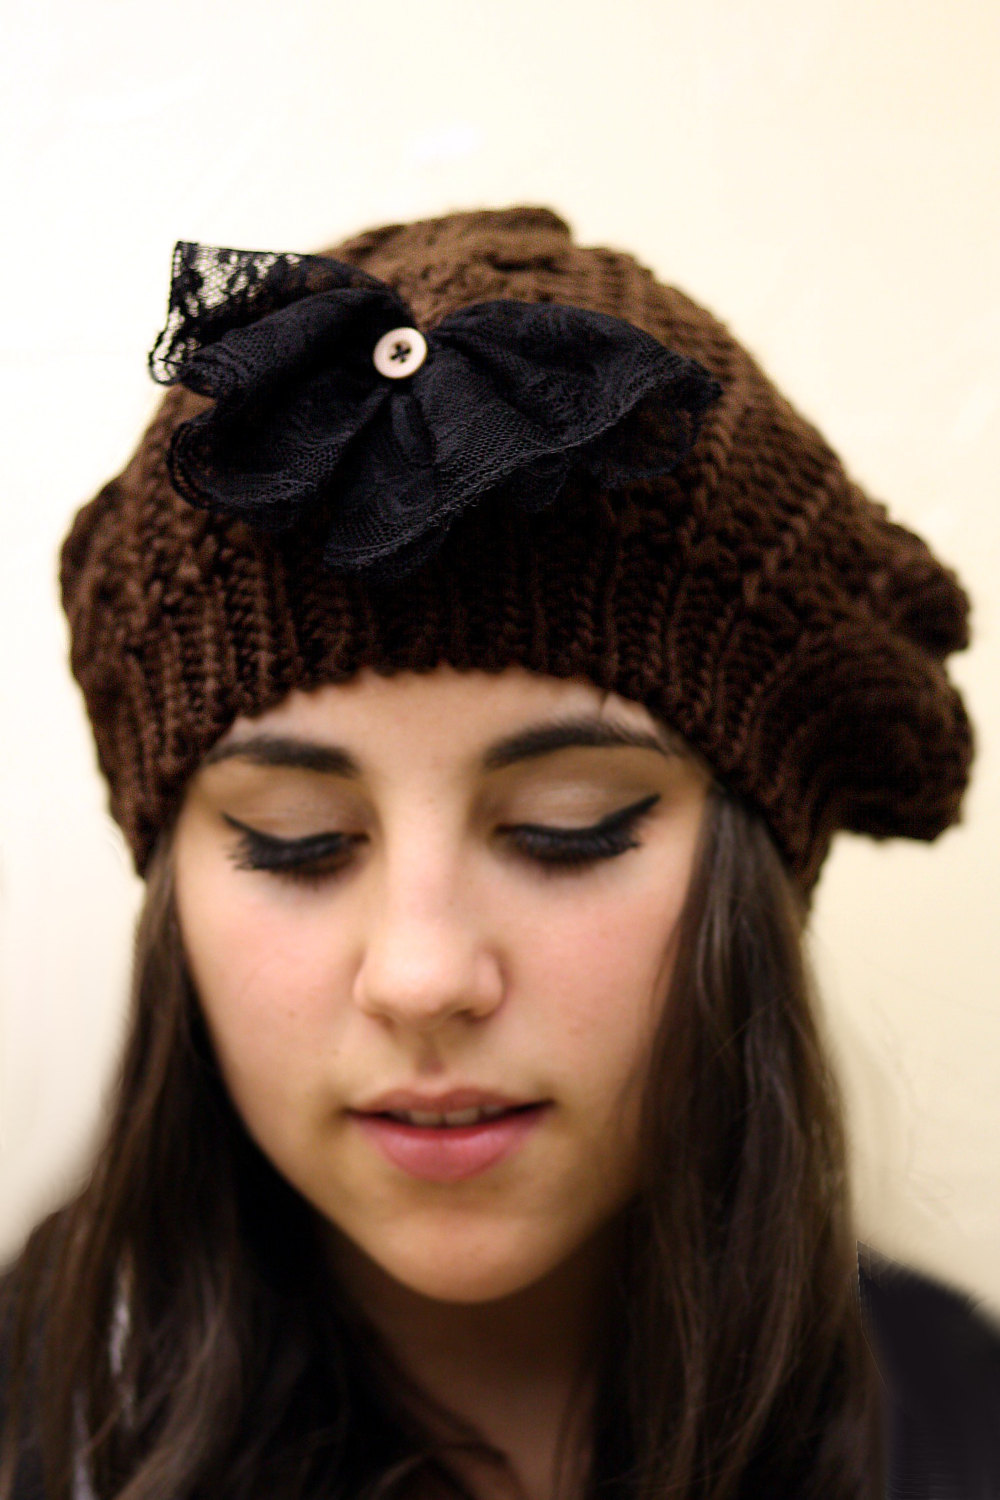 Black Bow Beanie Hat- Chocolate Brown , Black lace, wood button, lace bow , Cable Knit, Knitted, Crochet, Christmas Gift.